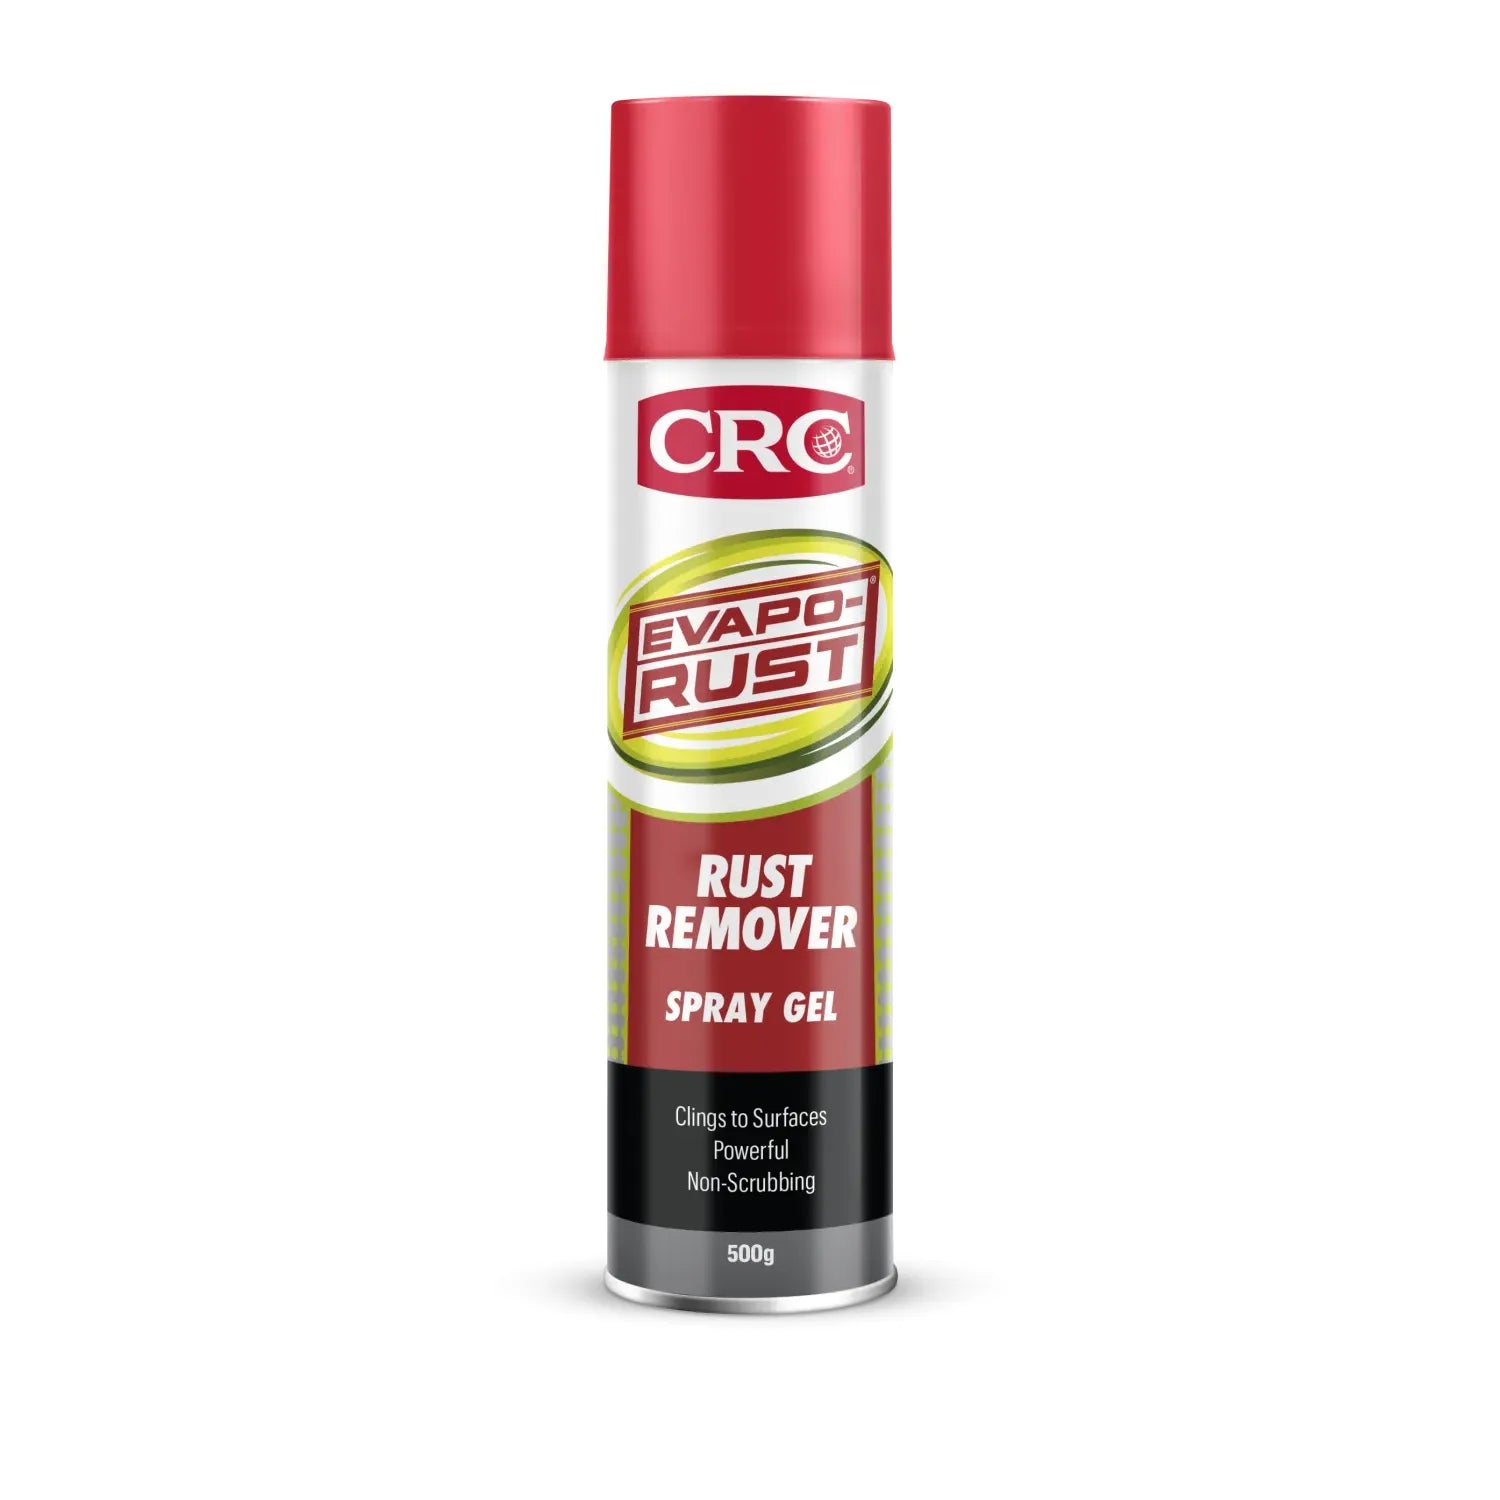 CRC Evapo-Rust Spray Gel 500G | Product Code : 1753336 - South East Clearance Centre